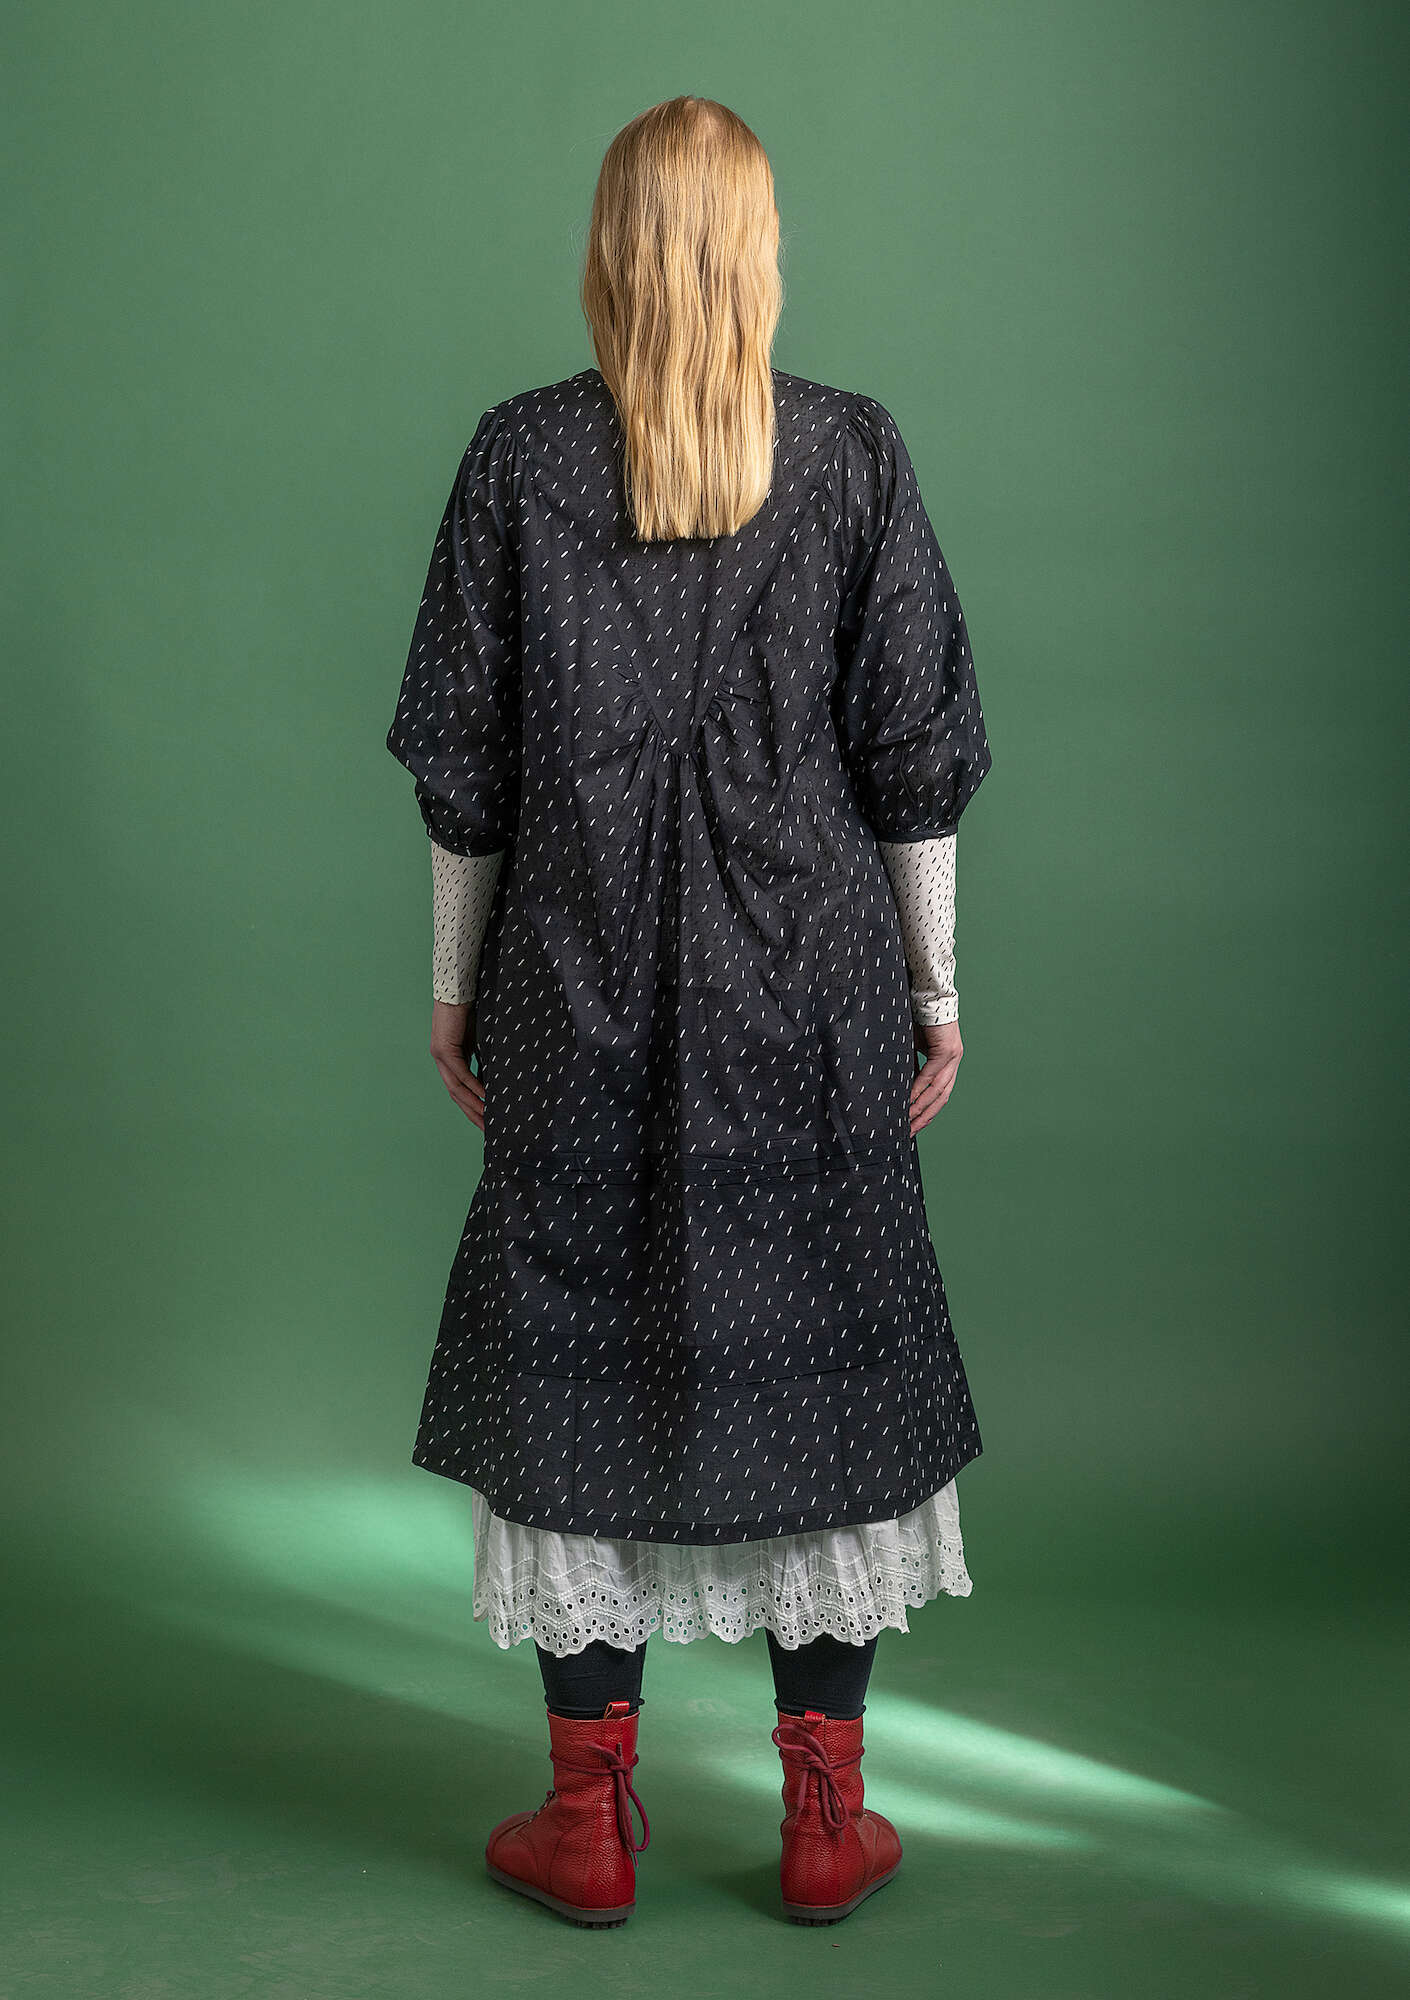 “Blossom” woven dress in organic cotton black/patterned thumbnail